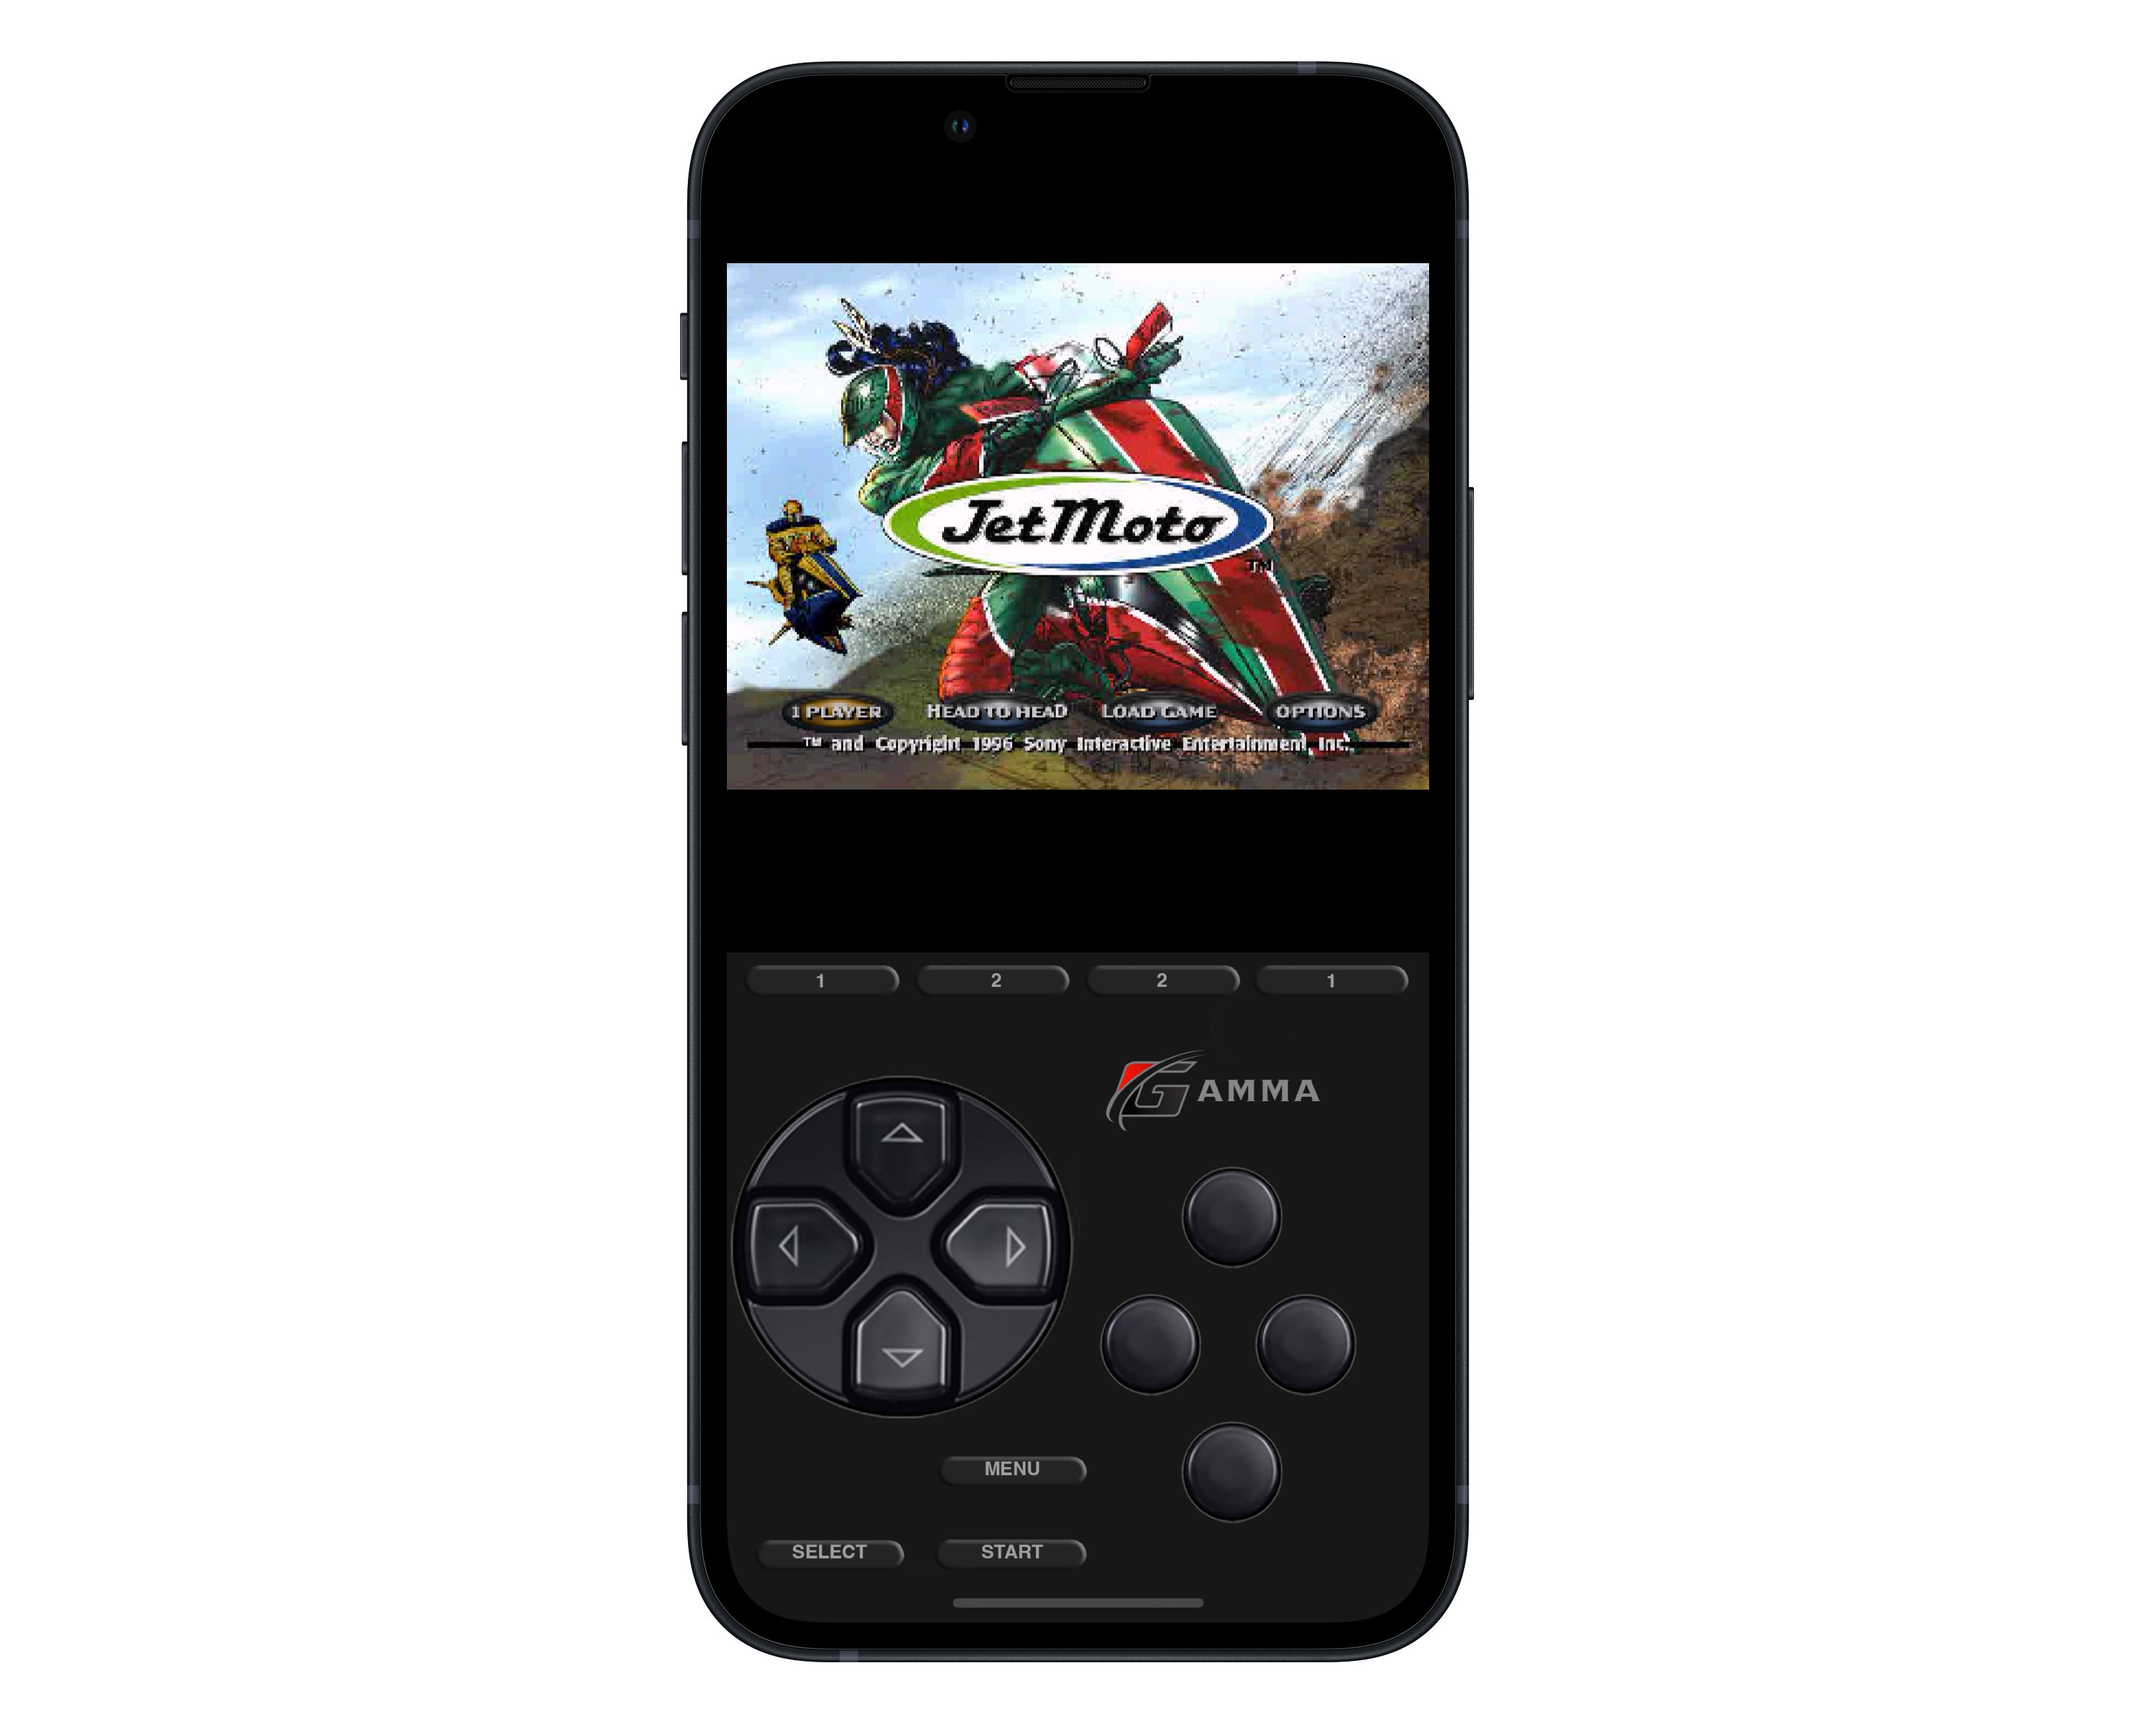 A screenshot of Jet Moto being played on an iPhone 13 Mini using the Gamma emulator. 